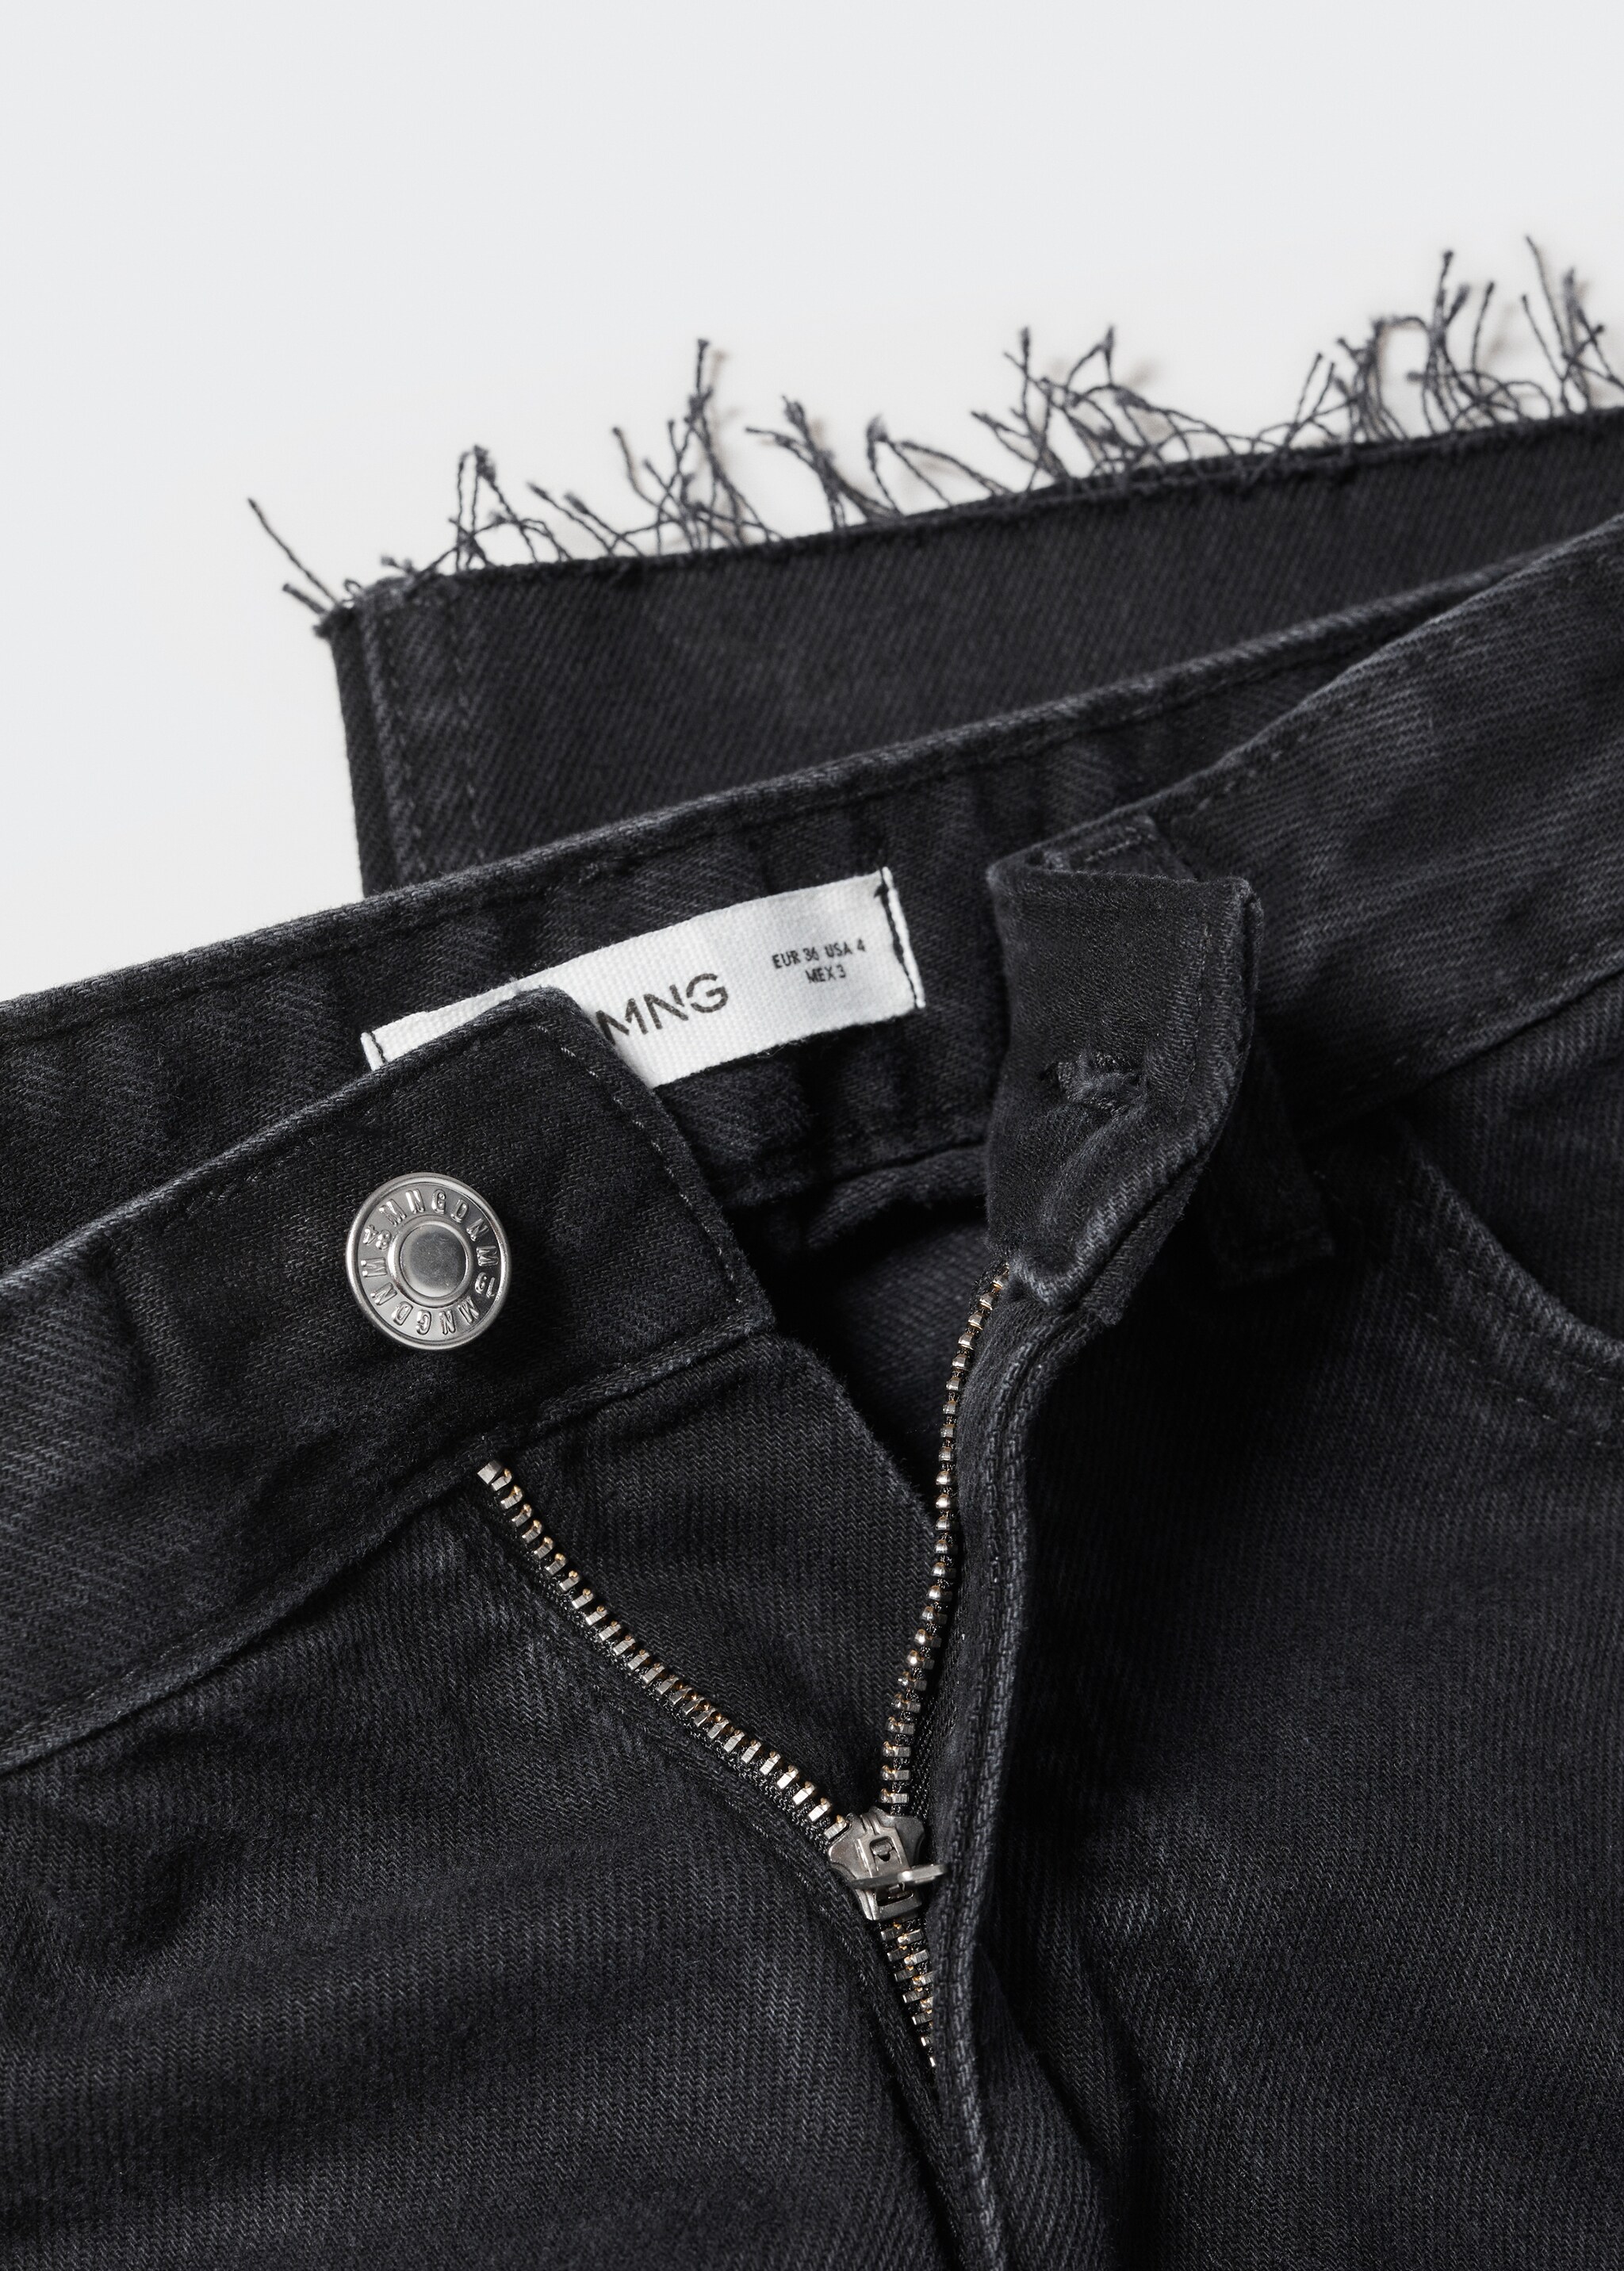 Wideleg mid-rise jeans - Details of the article 8